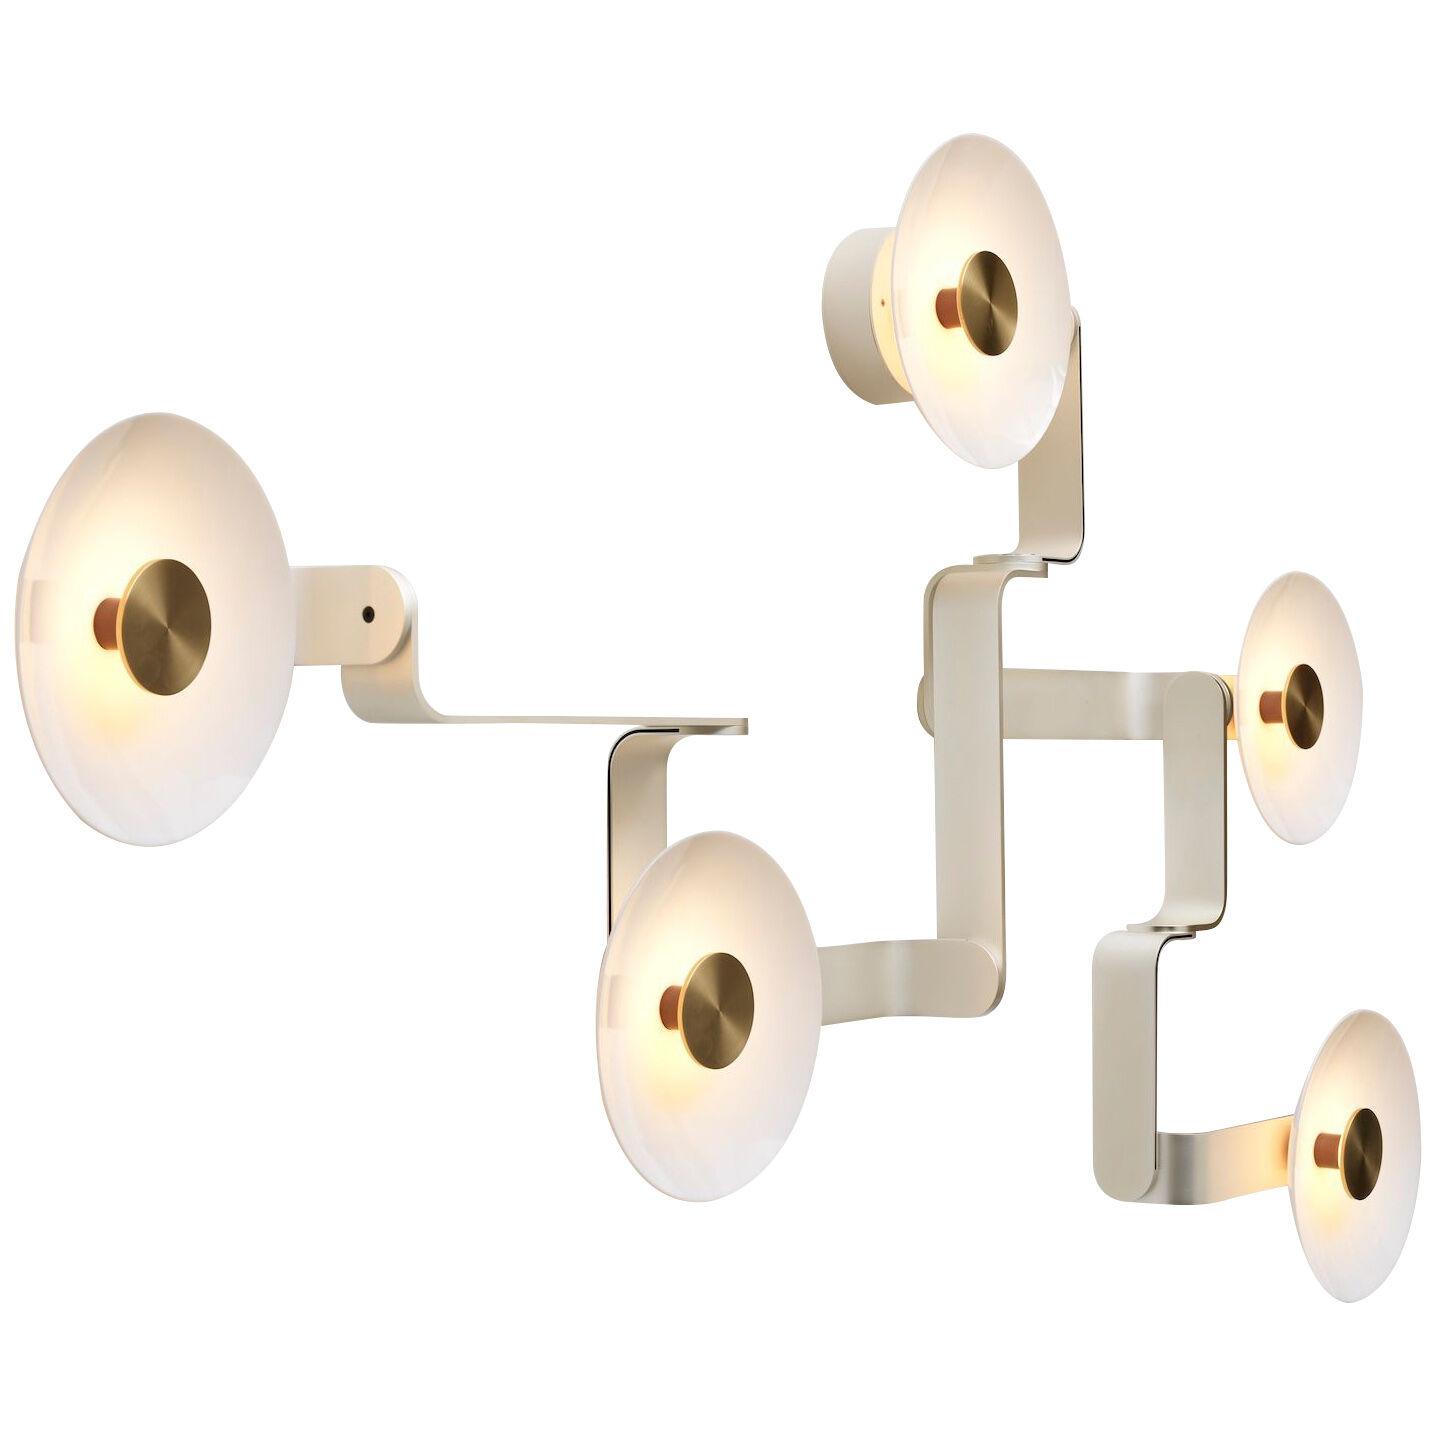 Elbo 5 Wall Sconce 